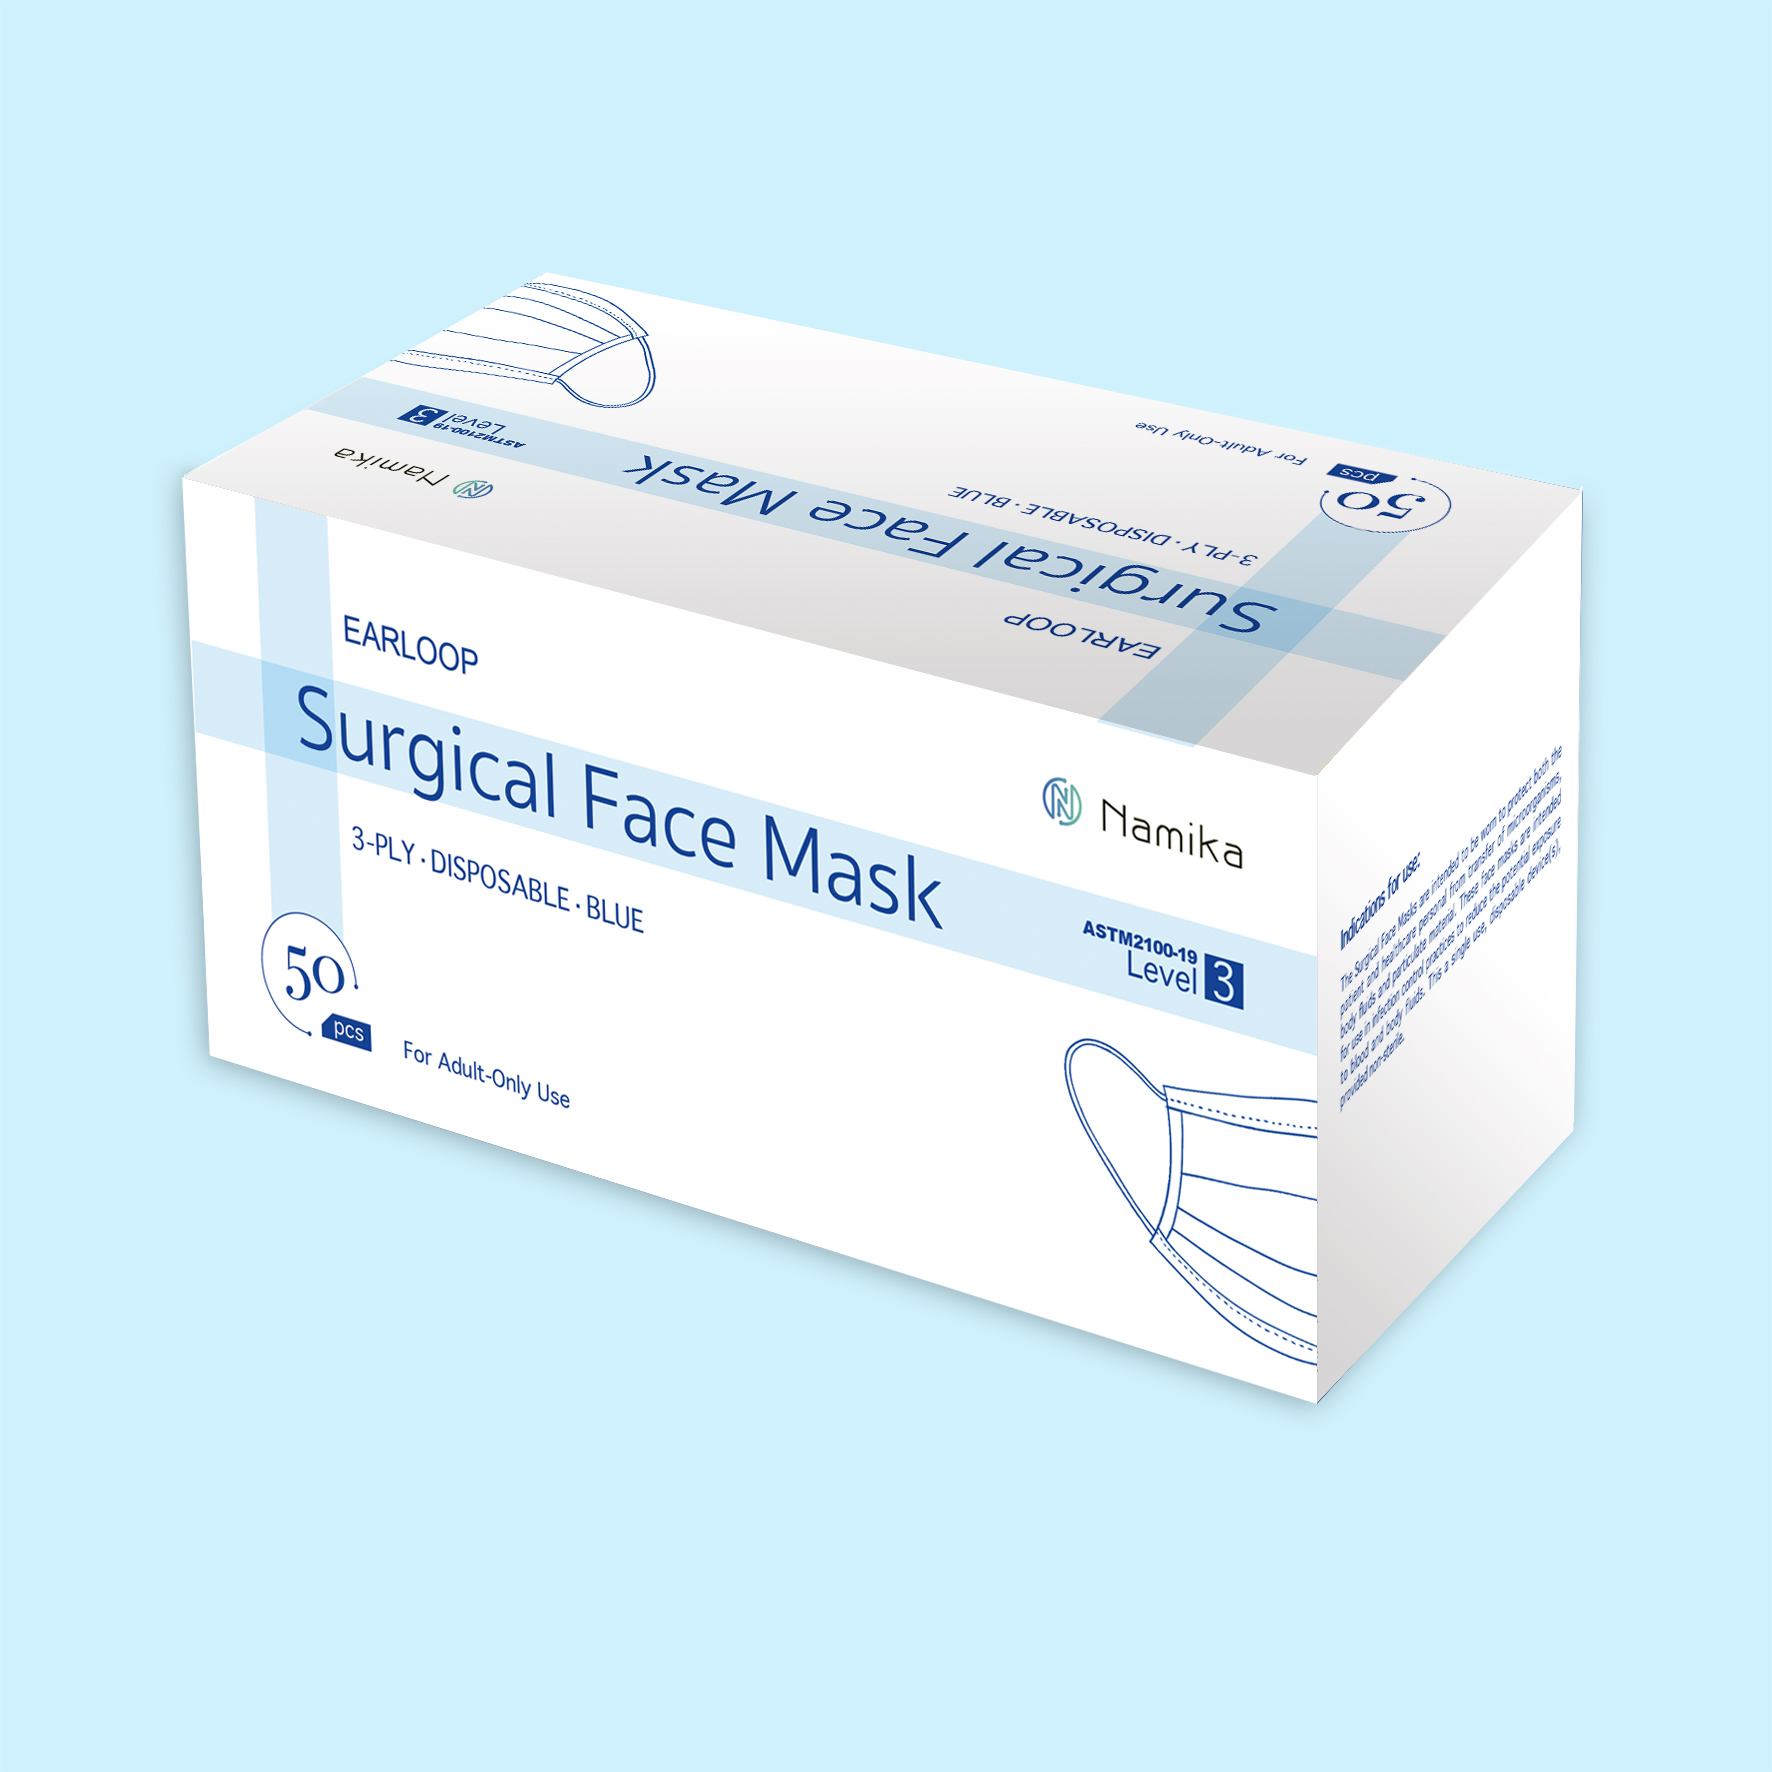 Surgical Mask (L3)